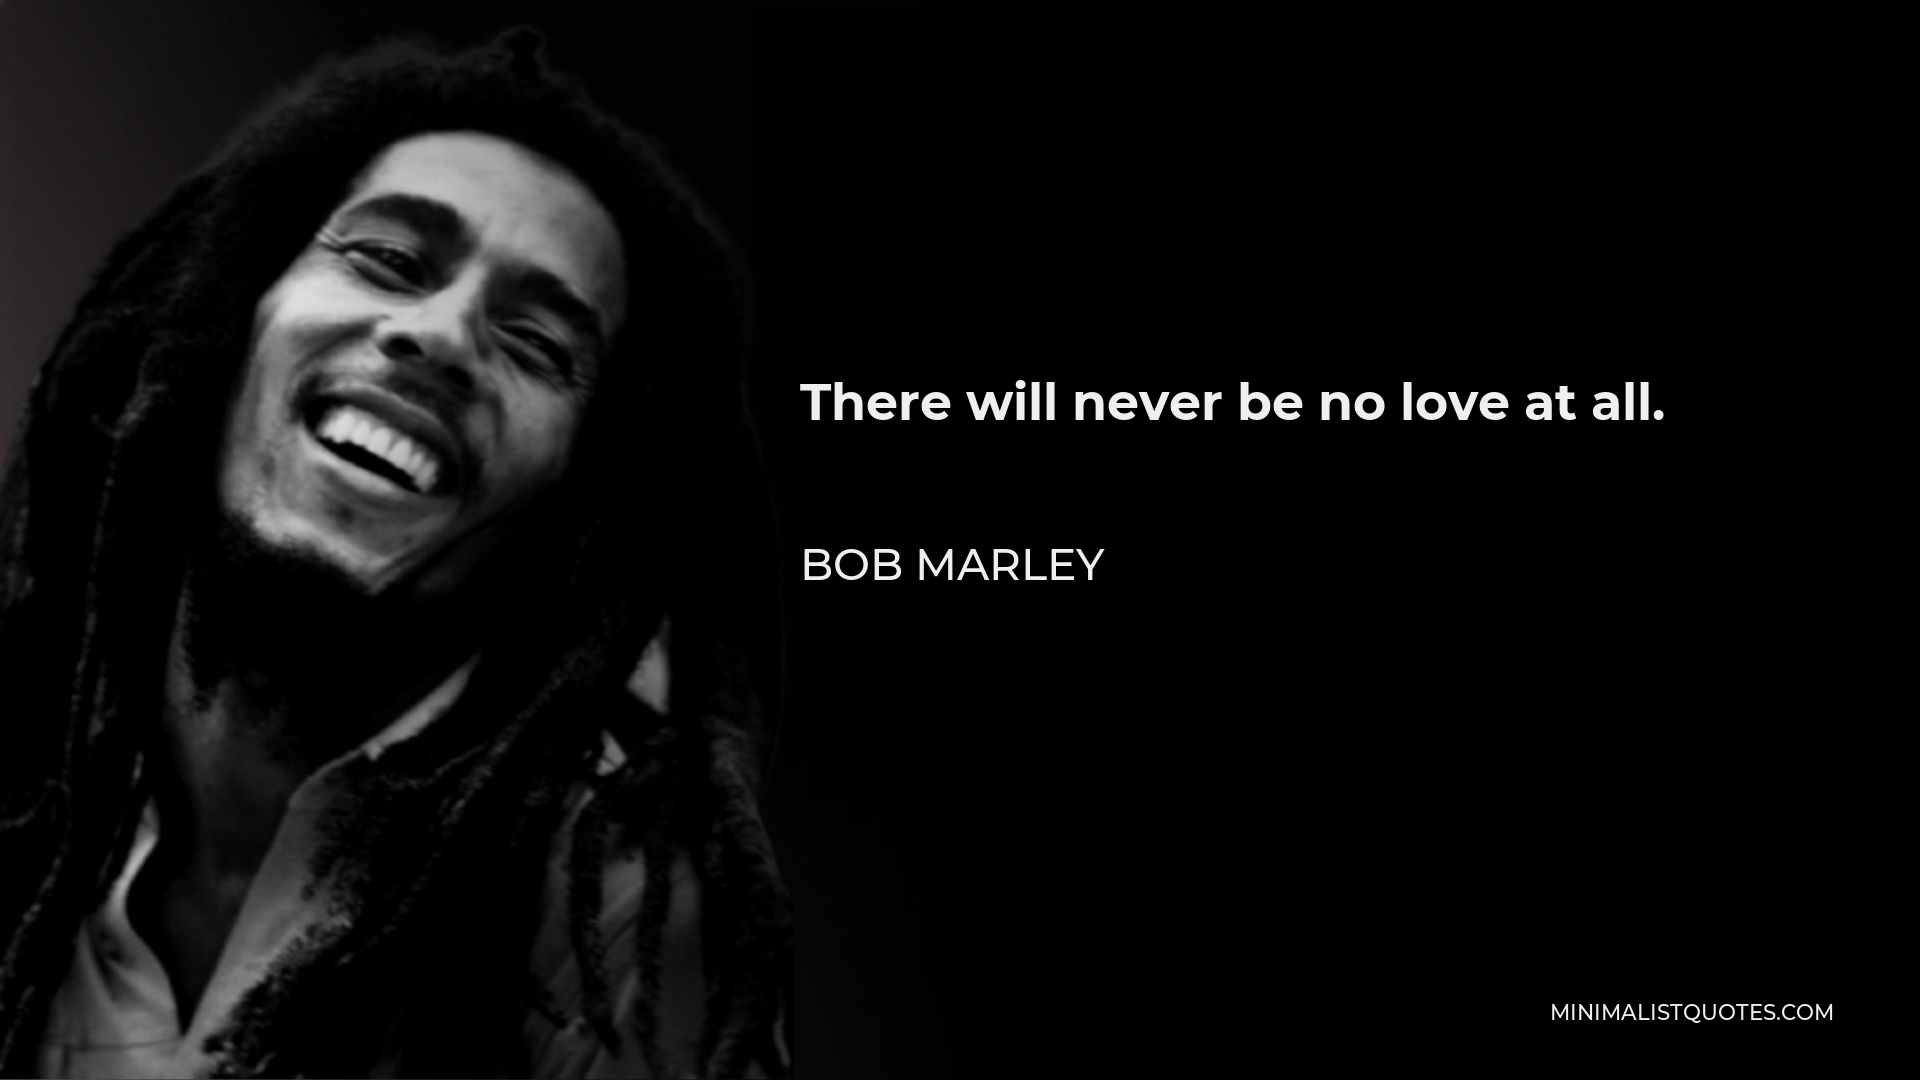 Bob Marley Quote - There will never be no love at all.